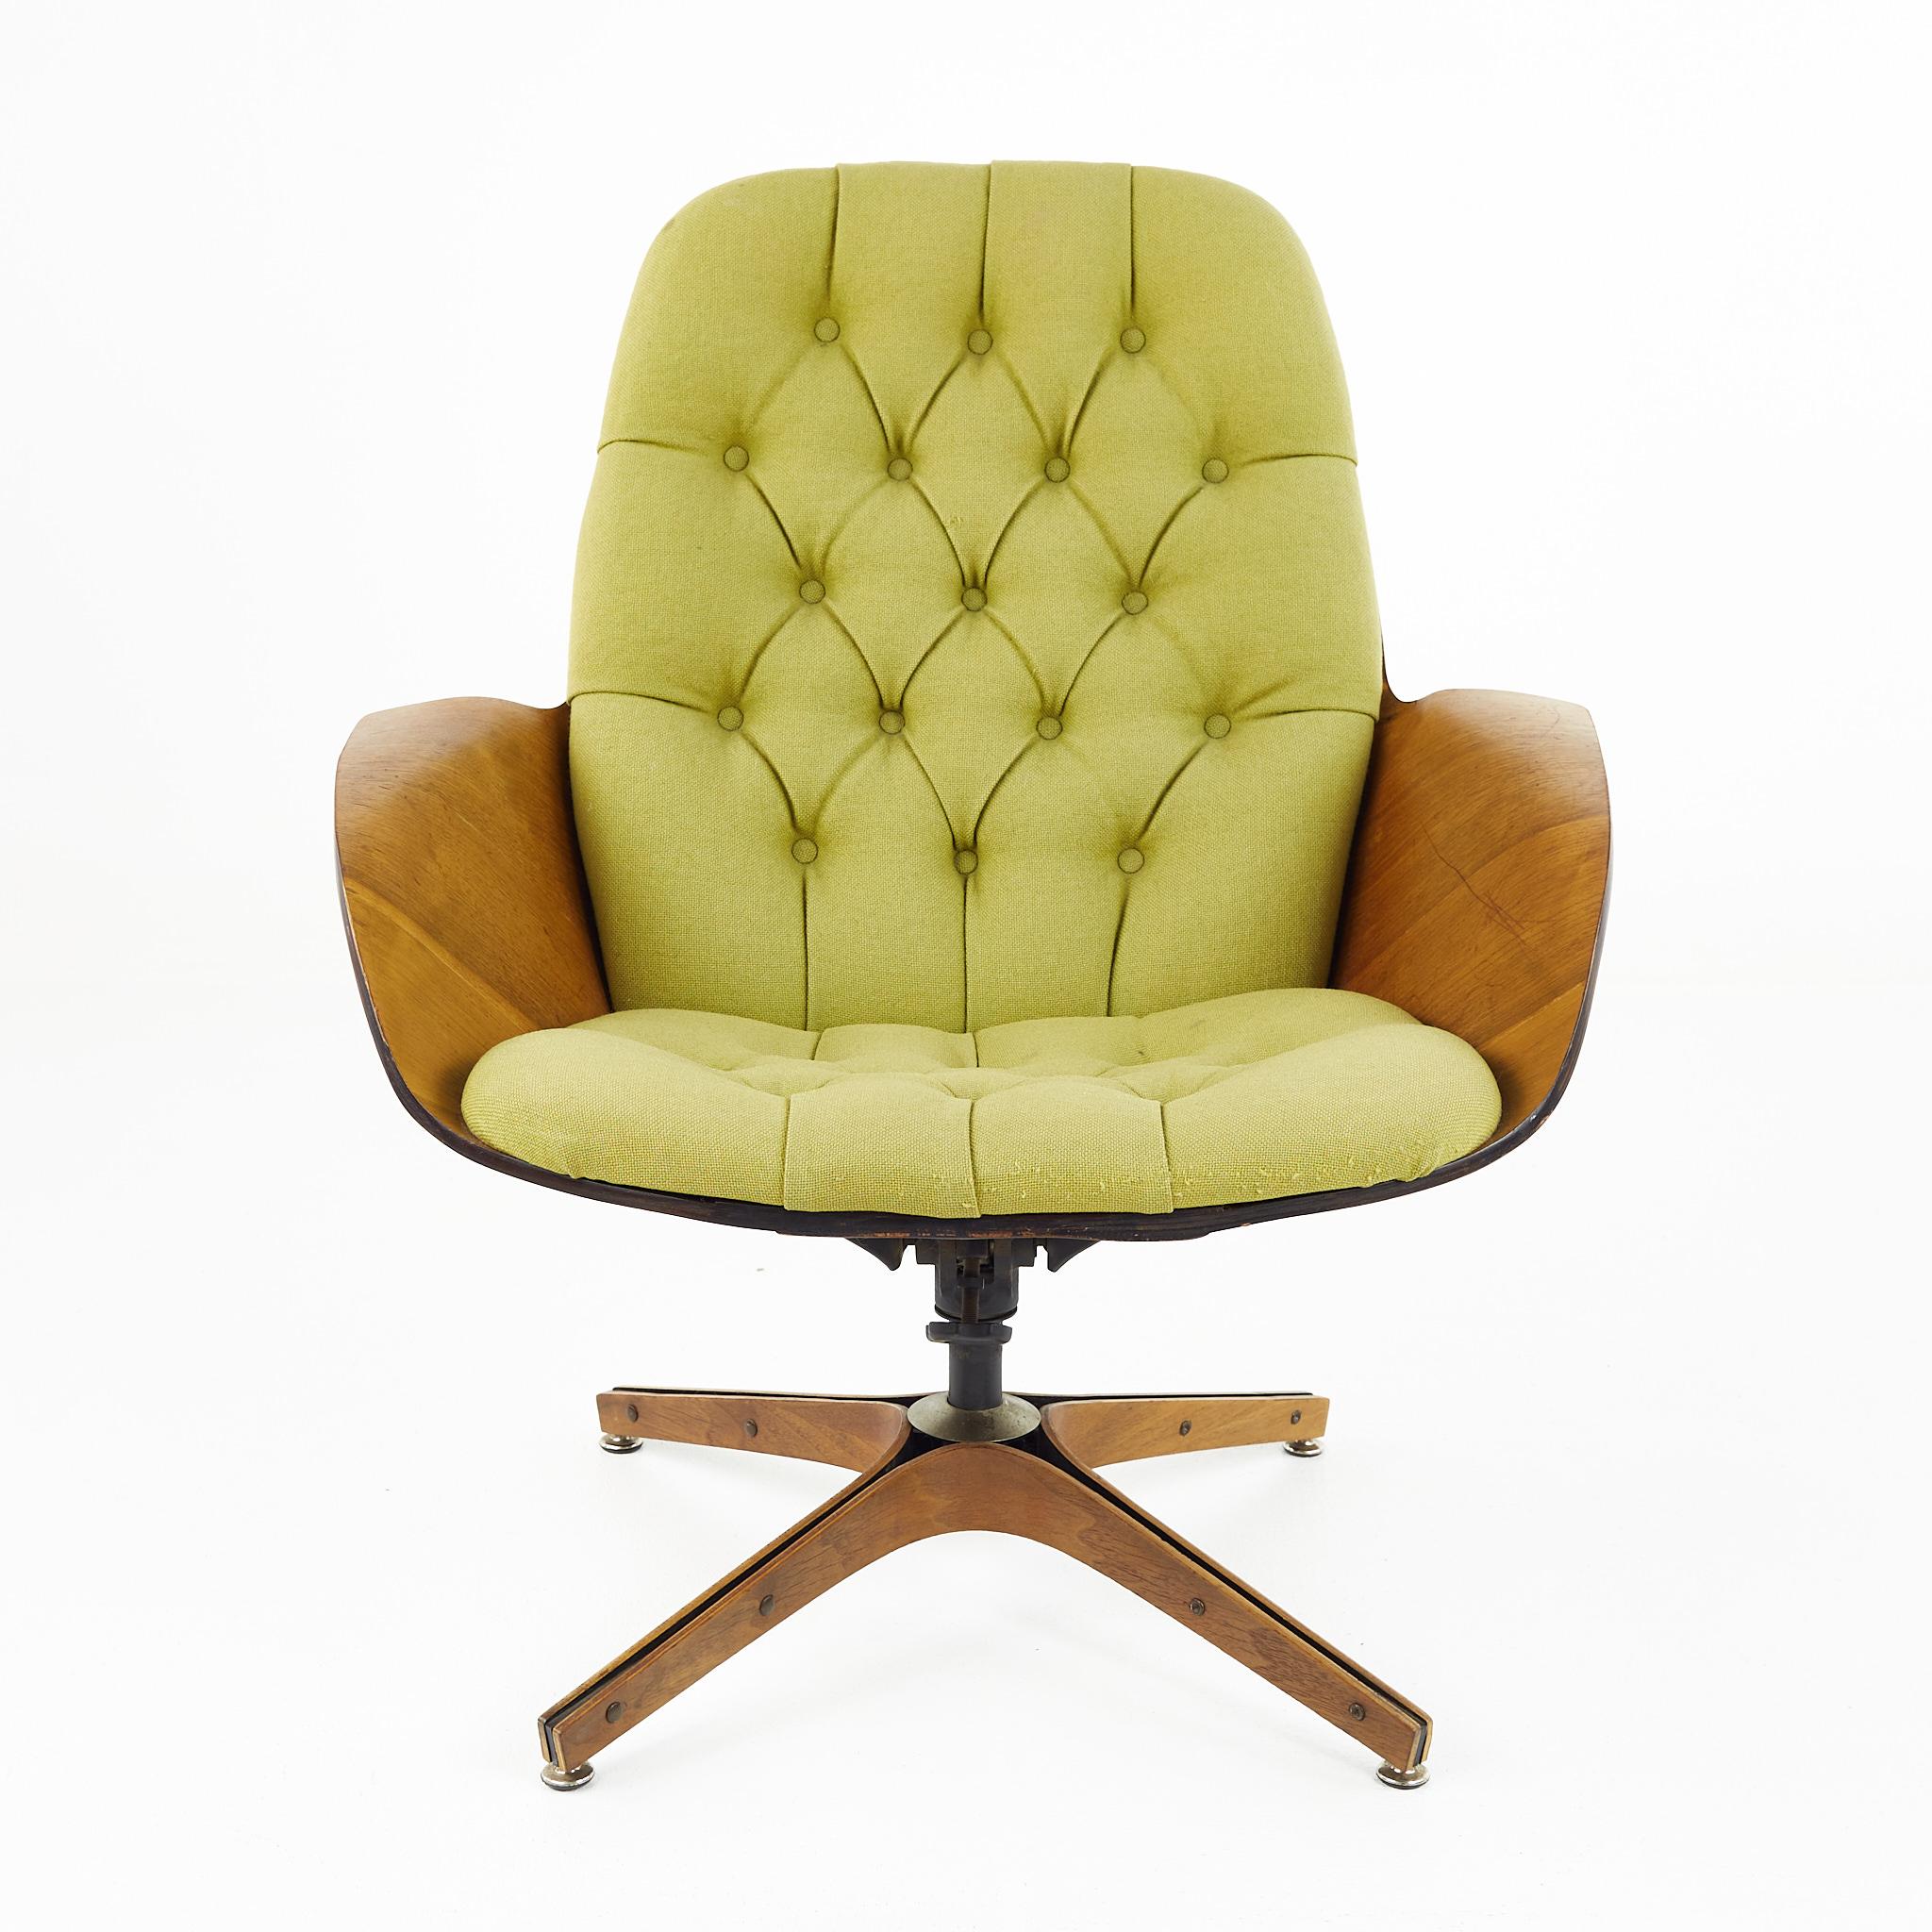 George Mulhauser for Plycraft mid century tufted mrs chair

This chair measures: 29 wide x 25 deep x 33 inches high, with a seat height of 16 and arm height of 20.5 inches

Ready for new upholstery. This service is available for an additional